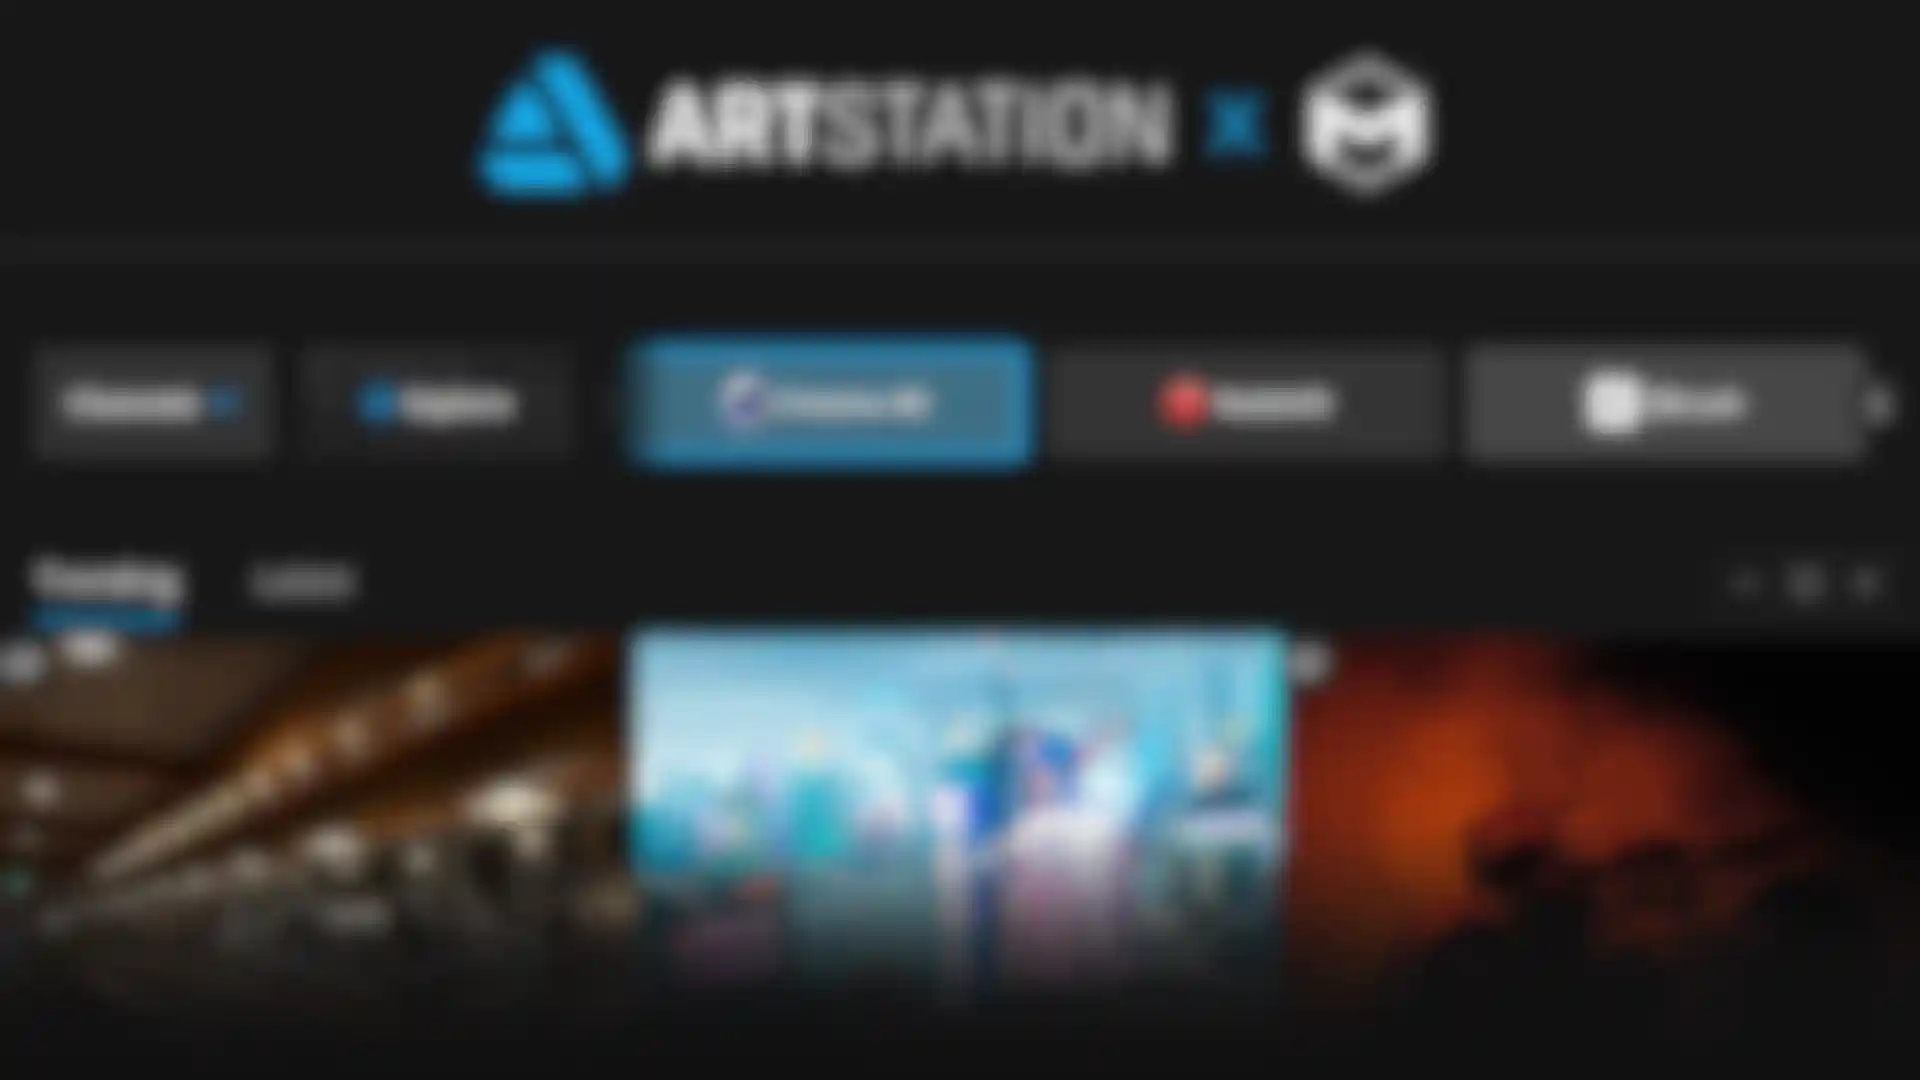 New Dedicated Maxon Product Channels Added to ArtStation image